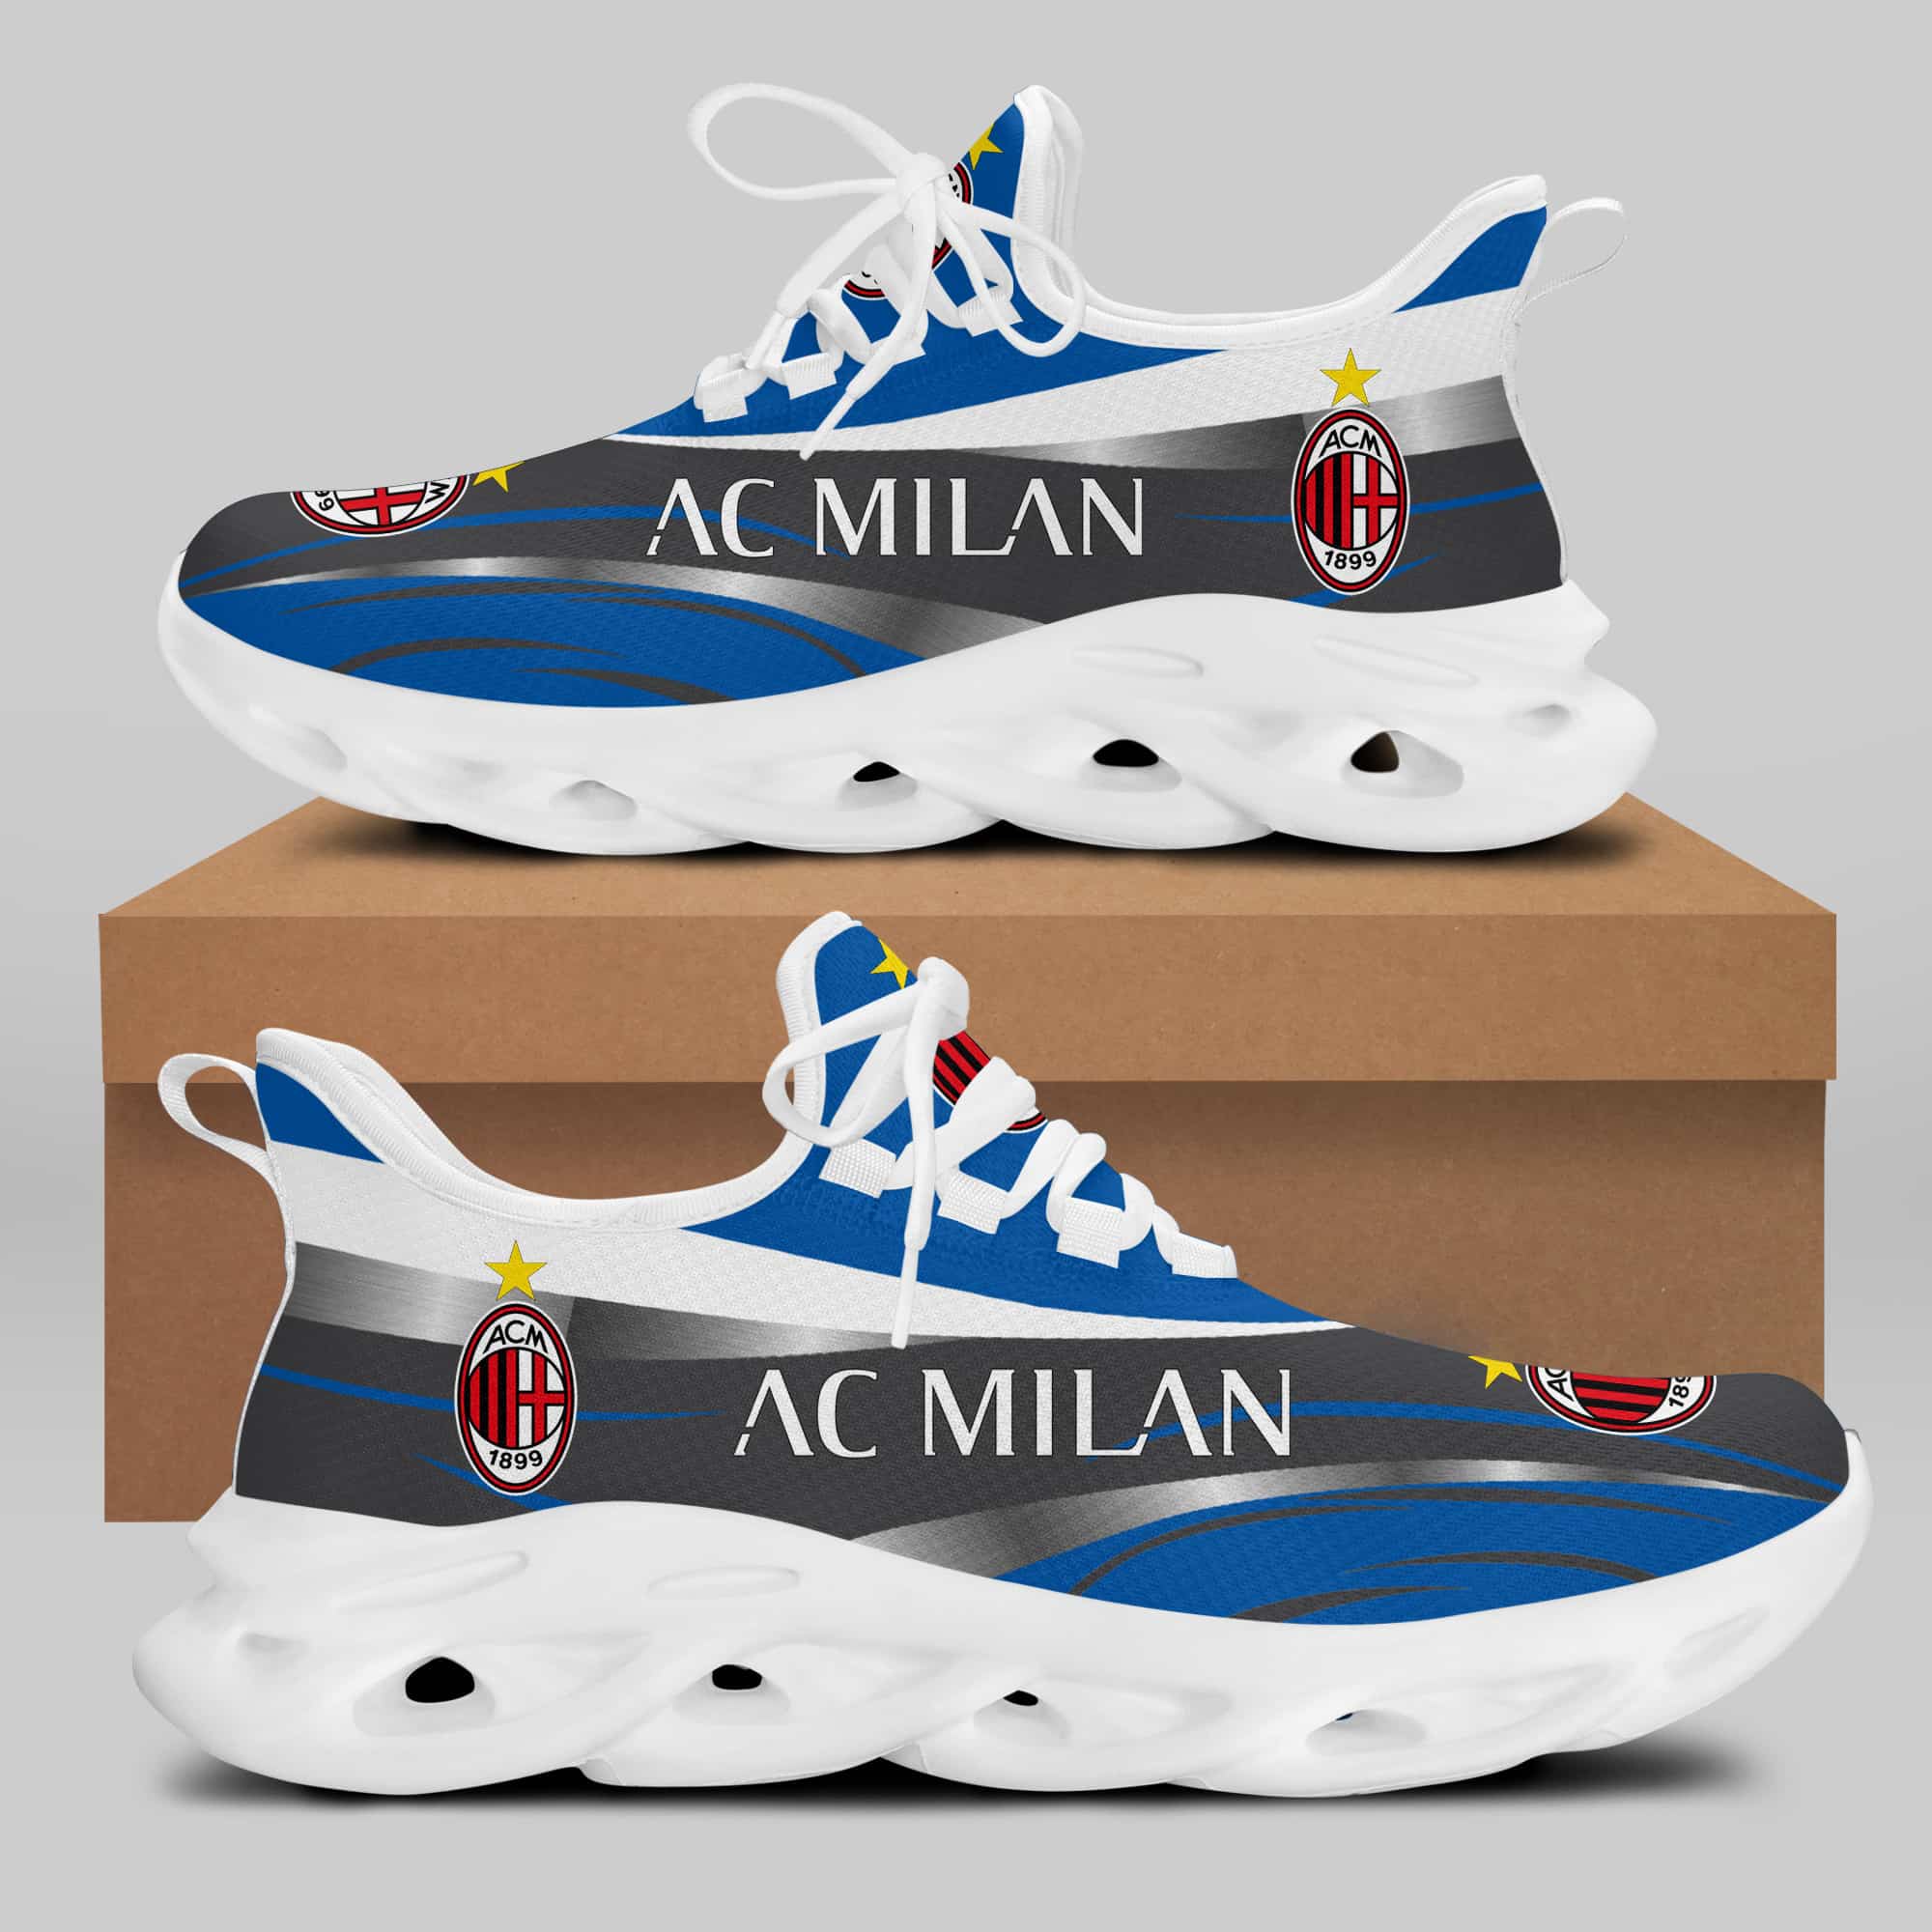 Ac Milan Running Shoes Max Soul Shoes Sneakers Ver 29 1